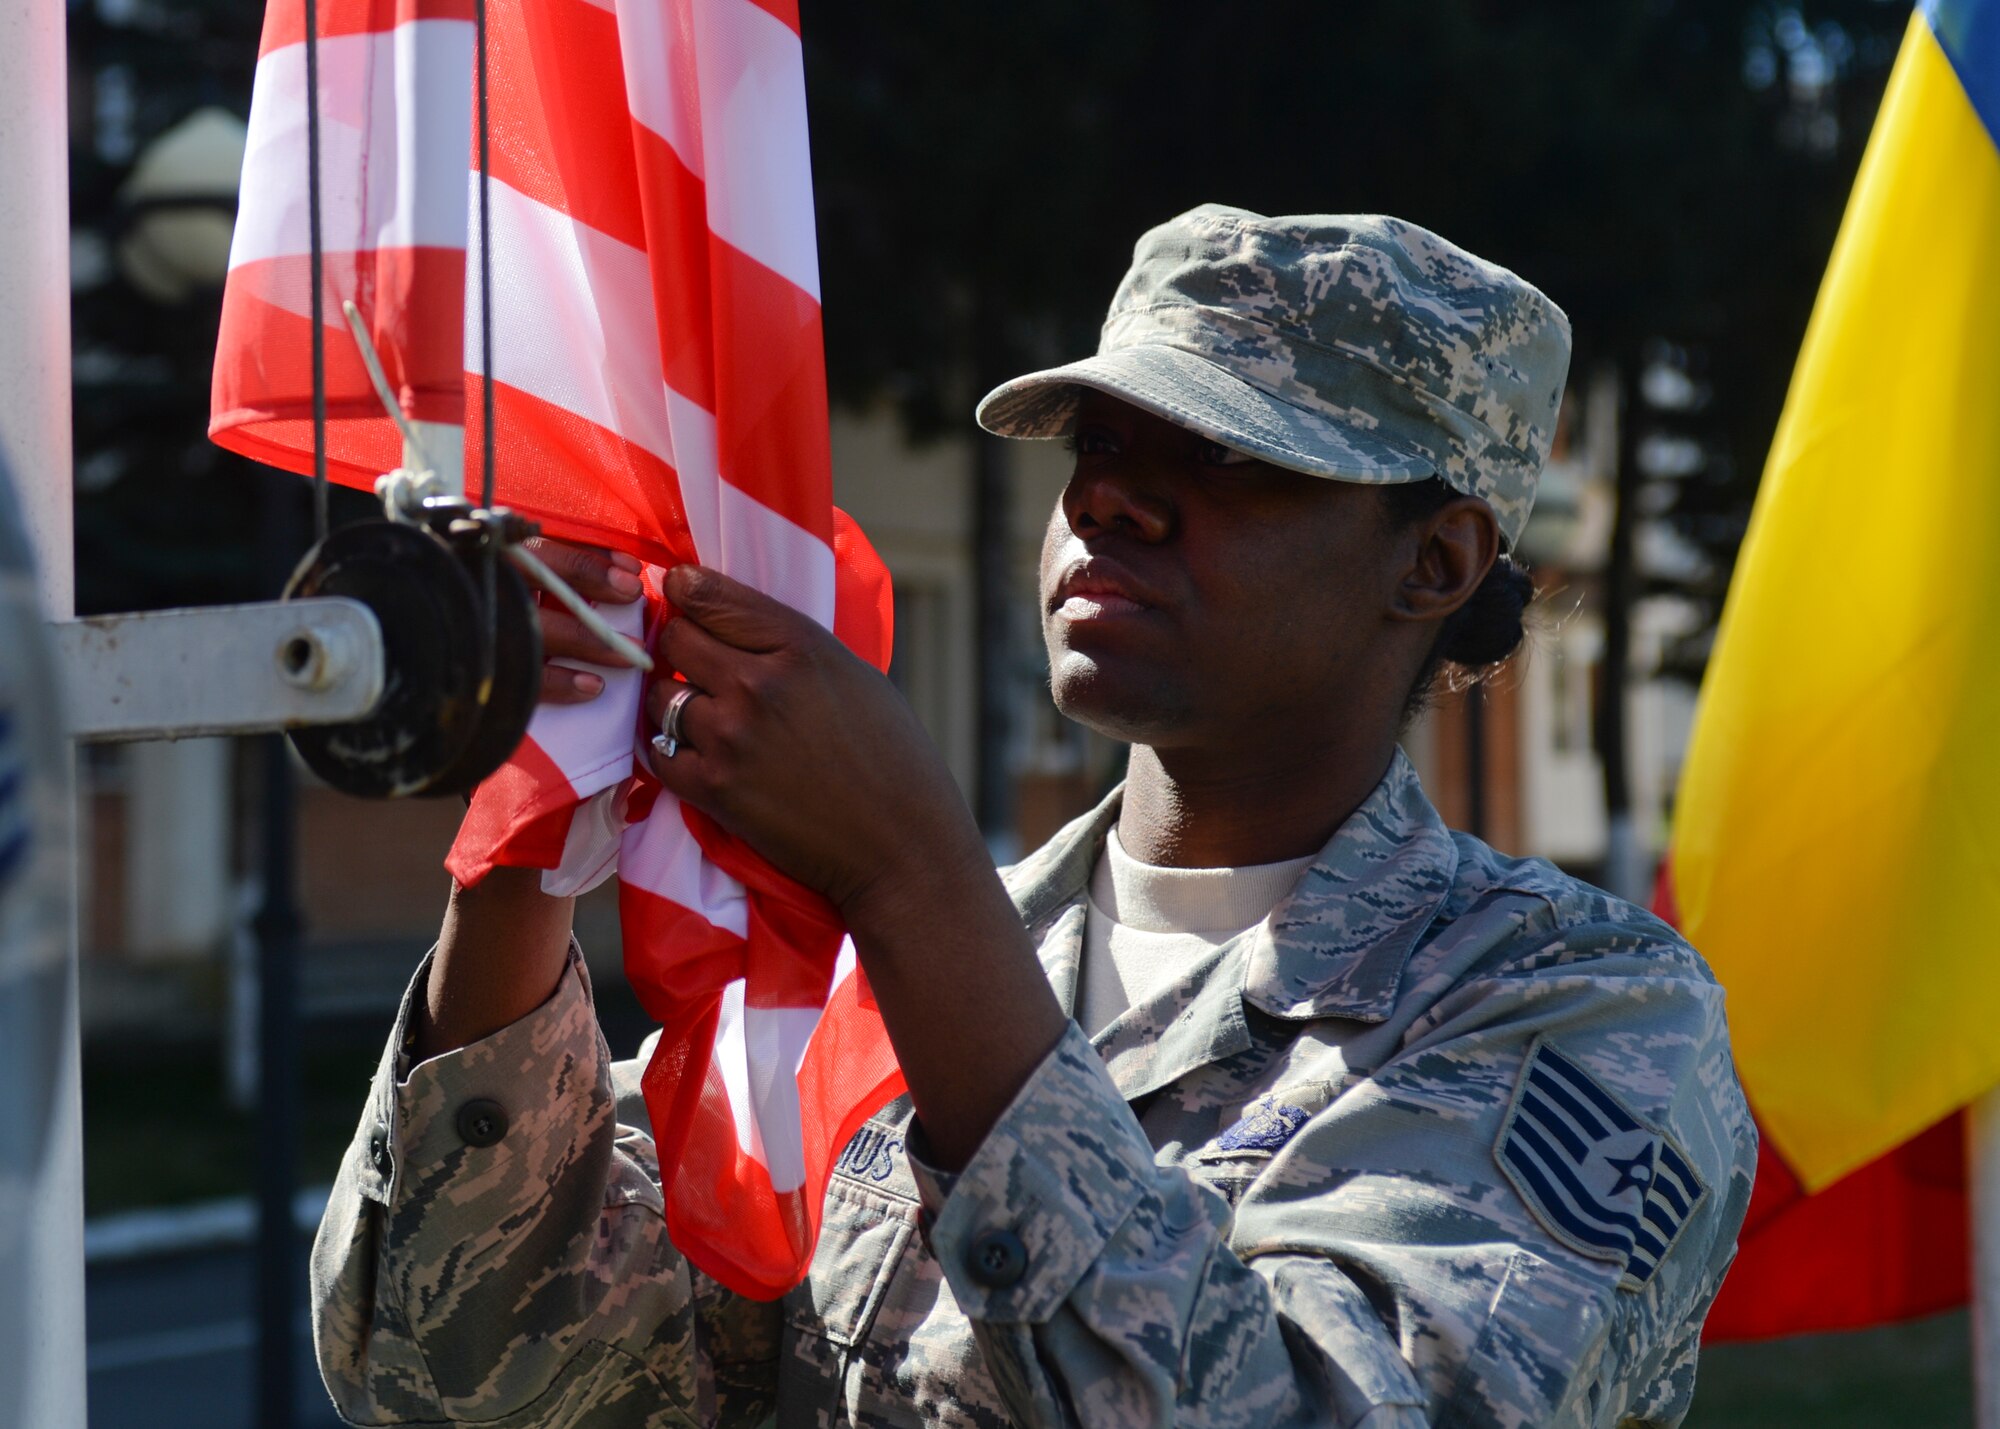 U.S. Air Force Tech. Sgt. Fallon Cornelius, a client systems technician assigned to the 354th Expeditionary Fighter Squadron, unfurls an American flag during the opening ceremony of Dacian Thunder 2015 at Campia Turzii, Romania, April 1, 2015. Cornelius and 300 fellow Airmen and support equipment from the 355th Fighter Wing at Davis-Monthan Air Force Base, Arizona, and the 52nd Fighter Wing at Spangdahlem Air Base, Germany, will support the theater security package as part of Operation Atlantic Resolve. (U.S. Air Force photo by Staff Sgt. Joe W. McFadden/Released)